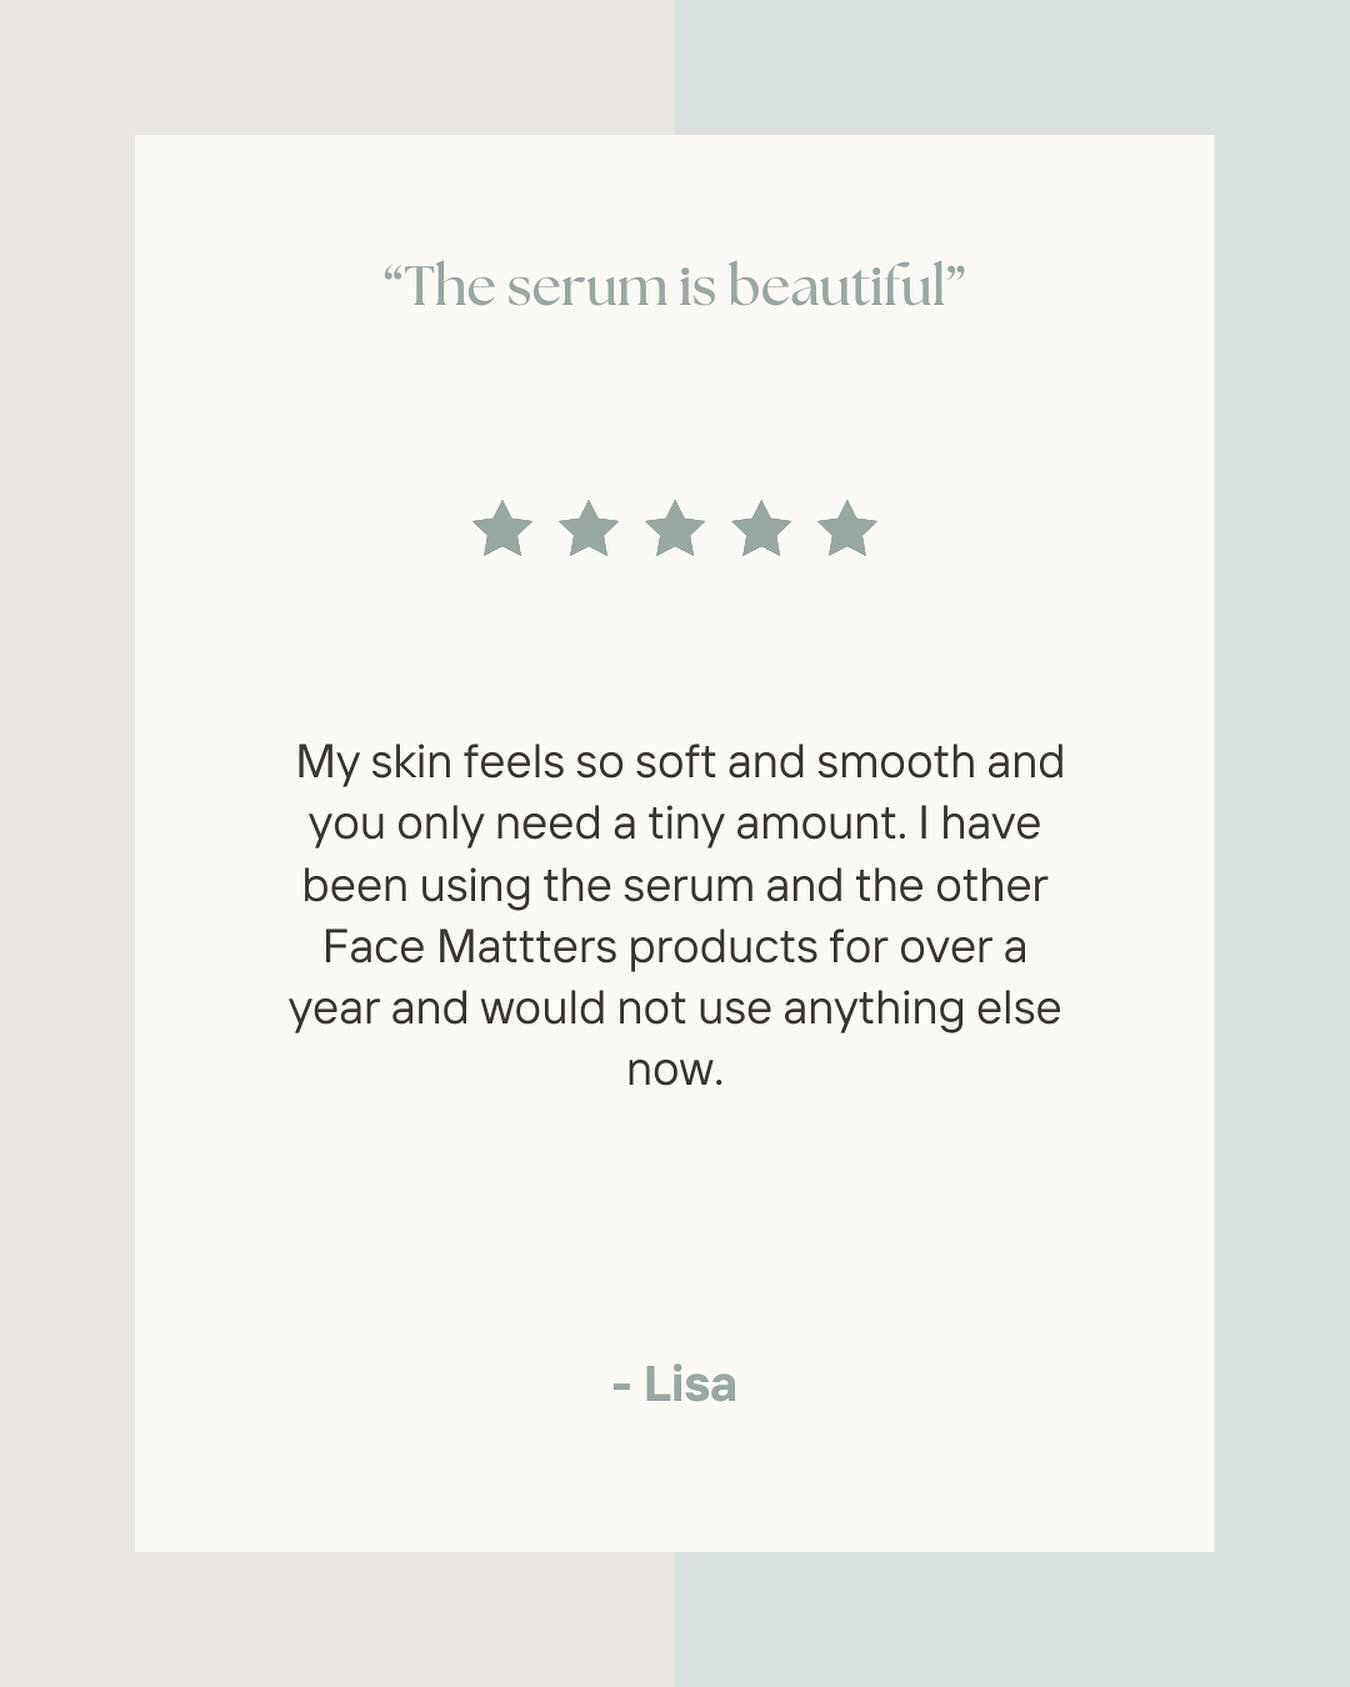 &ldquo;The Face Food serum is beautiful. My skin feels so soft and smooth and you only need a tiny amount. I have been using the serum and the other Face Matters products for over a year and would not use anything else now.&rdquo;

We believe that ev